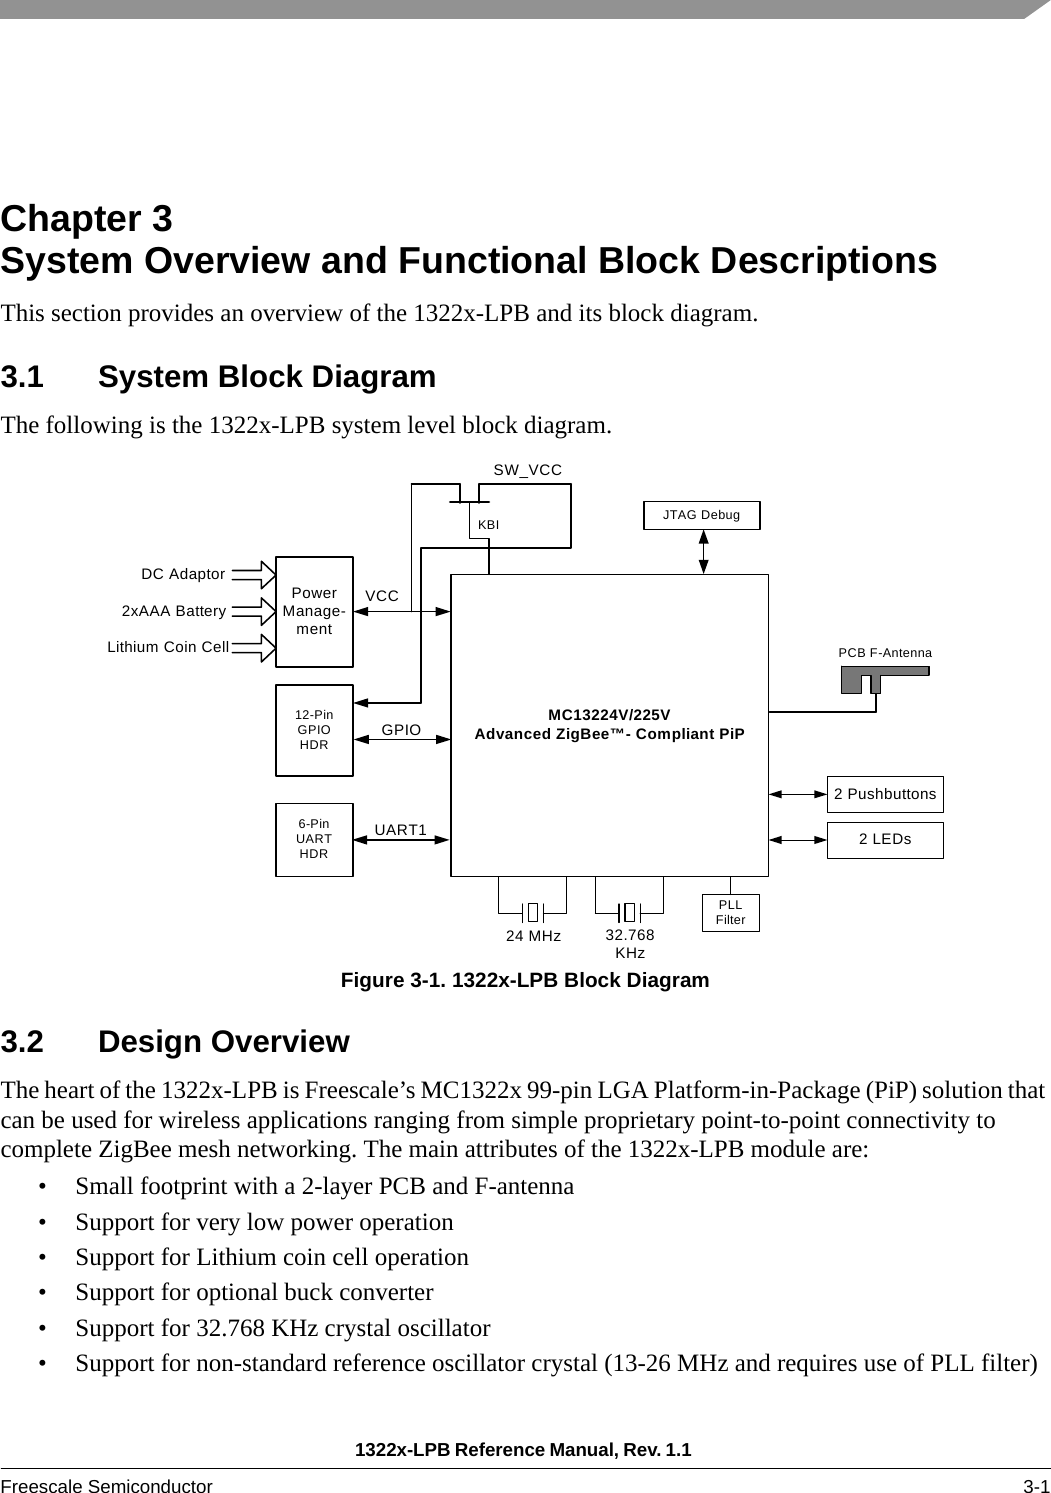 1322x-LPB Reference Manual, Rev. 1.1 Freescale Semiconductor 3-1Chapter 3  System Overview and Functional Block DescriptionsThis section provides an overview of the 1322x-LPB and its block diagram.3.1 System Block DiagramThe following is the 1322x-LPB system level block diagram.Figure 3-1. 1322x-LPB Block Diagram3.2 Design OverviewThe heart of the 1322x-LPB is Freescale’s MC1322x 99-pin LGA Platform-in-Package (PiP) solution that can be used for wireless applications ranging from simple proprietary point-to-point connectivity to complete ZigBee mesh networking. The main attributes of the 1322x-LPB module are:• Small footprint with a 2-layer PCB and F-antenna• Support for very low power operation• Support for Lithium coin cell operation• Support for optional buck converter• Support for 32.768 KHz crystal oscillator• Support for non-standard reference oscillator crystal (13-26 MHz and requires use of PLL filter)MC13224V/225VAdvanced ZigBee™- Compliant PiP6-PinUARTHDRUART1JTAG DebugPCB F-Antenna24 MHz 32.768KHz12-PinGPIOHDRPLLFilterGPIO2 Pushbuttons2 LEDsPowerManage-mentDC Adaptor2xAAA BatteryLithium Coin CellVCCSW_VCCKBI